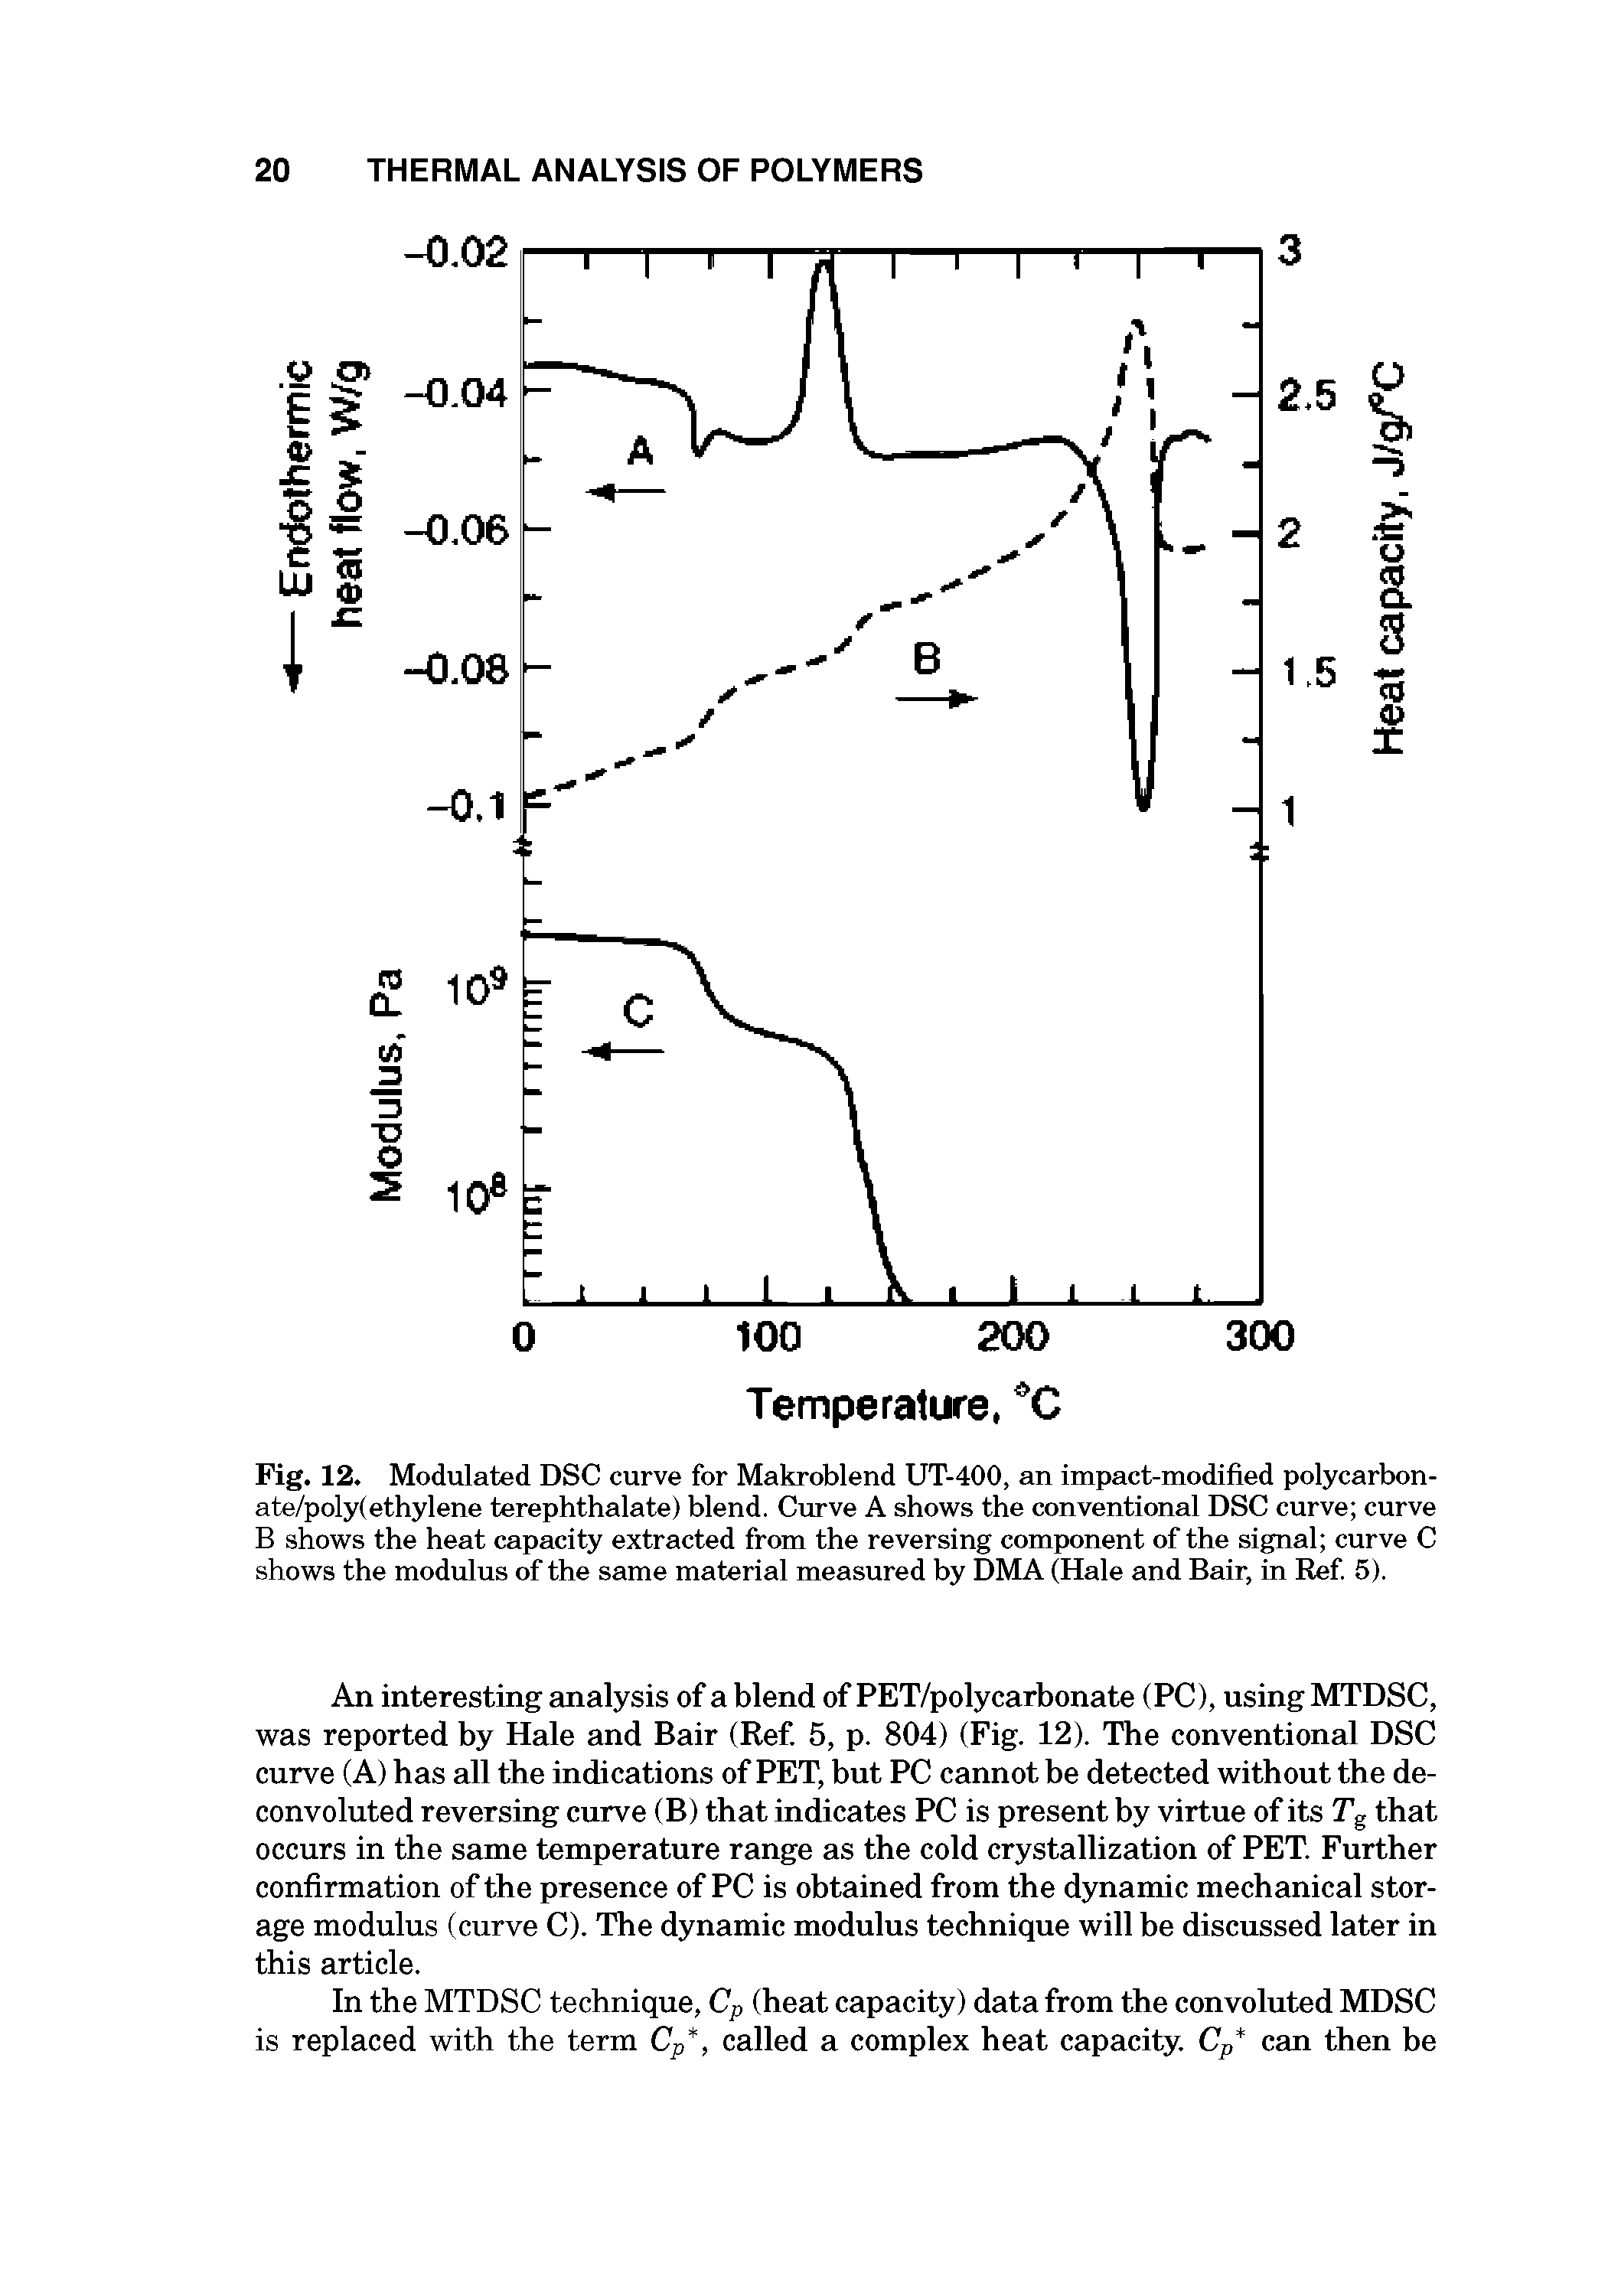 Fig. 12. Modulated DSC curve for Makroblend UT-400, an impact-modified polycarbon-ate/poly(ethylene terephthalate) blend. Curve A shows the conventional DSC curve curve B shows the heat capacity extracted from the reversing component of the signal curve C shows the modulus of the same material measured by DMA (Hale and Bair, in Ref 5).